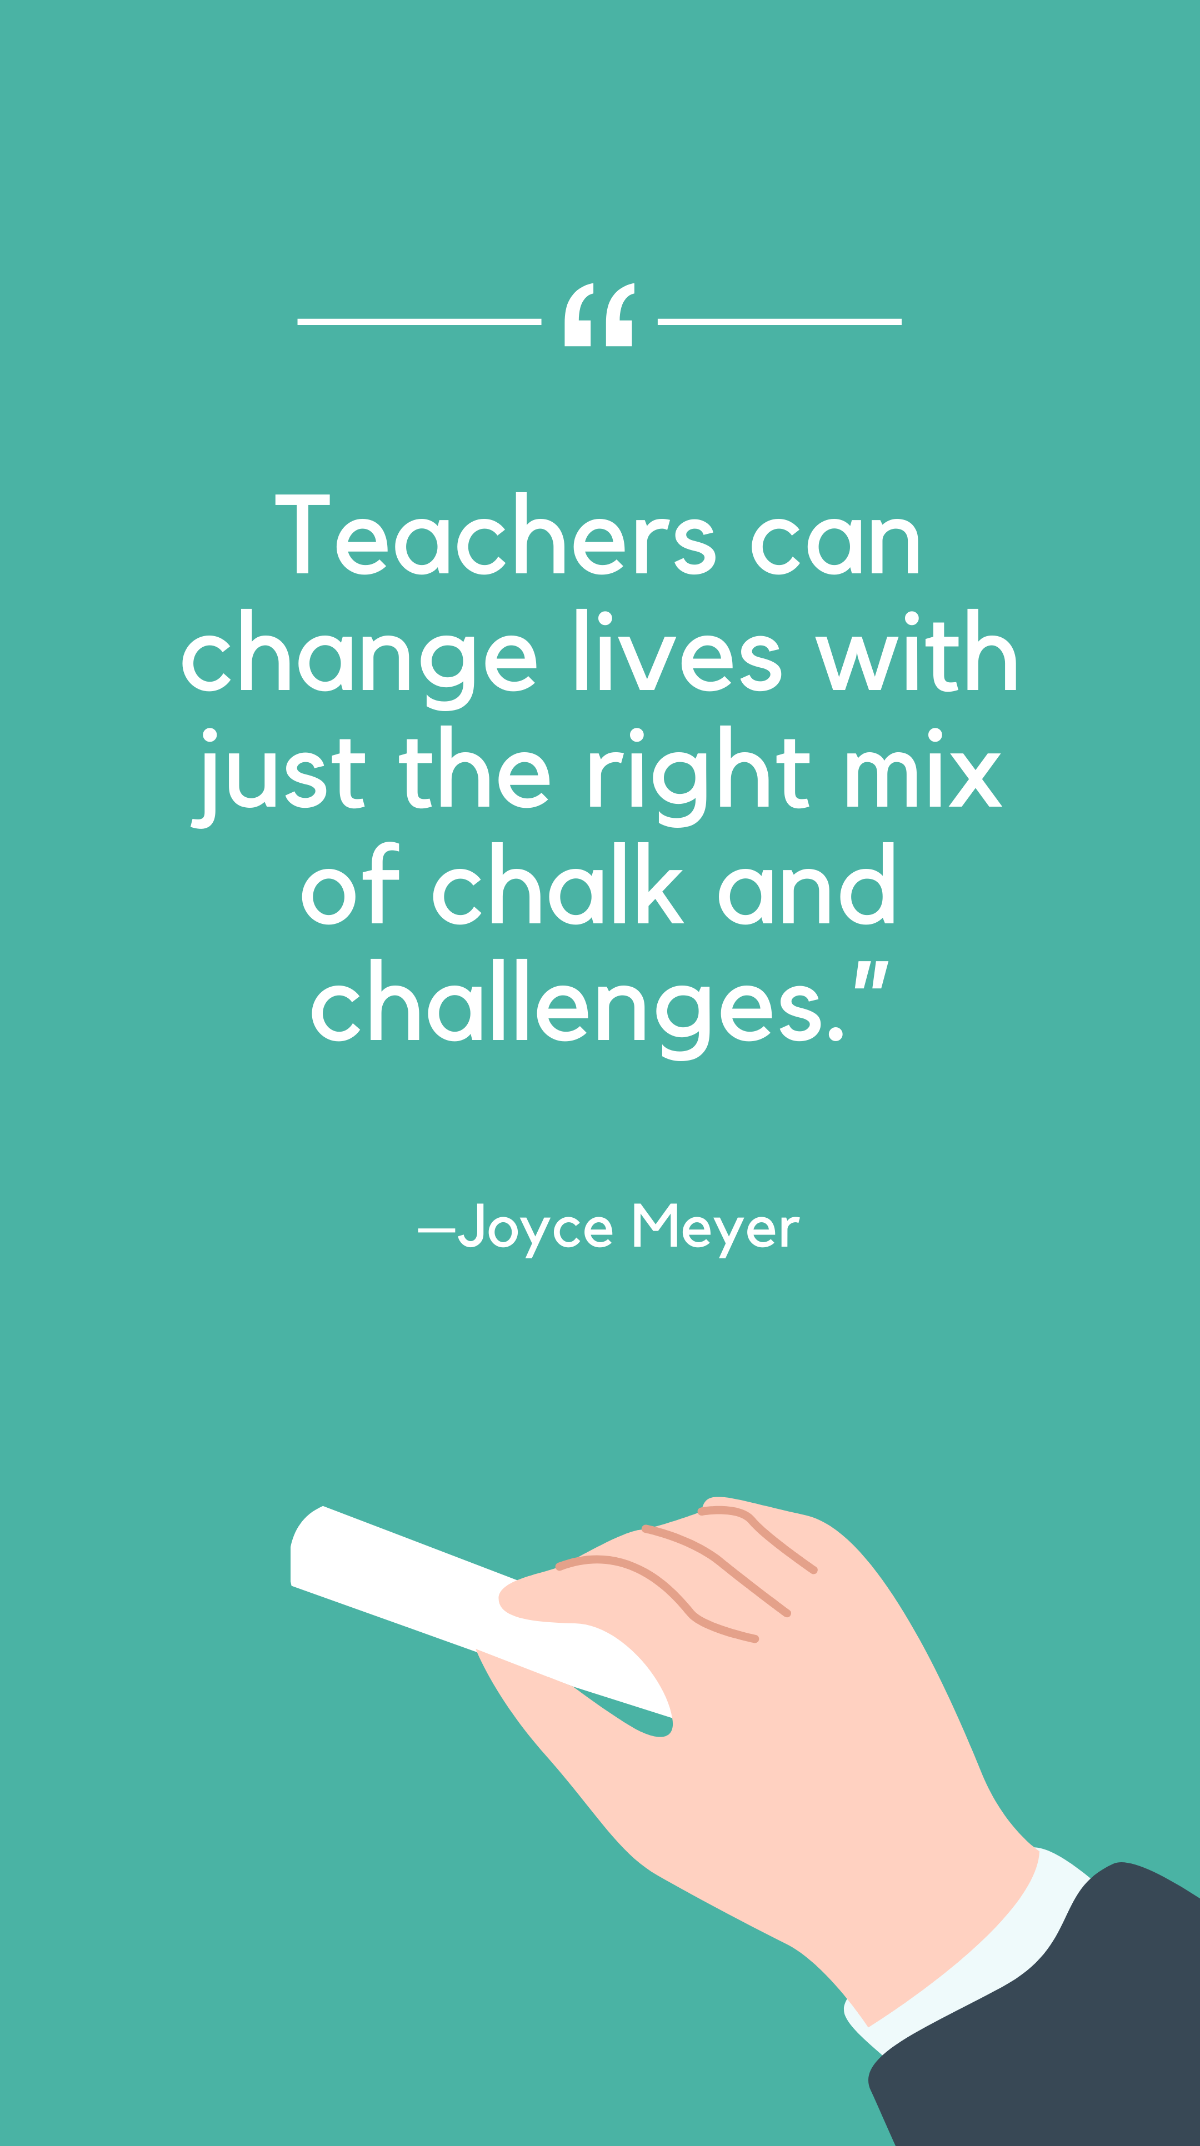 Joyce Meyer - Teachers can change lives with just the right mix of chalk and challenges. Template